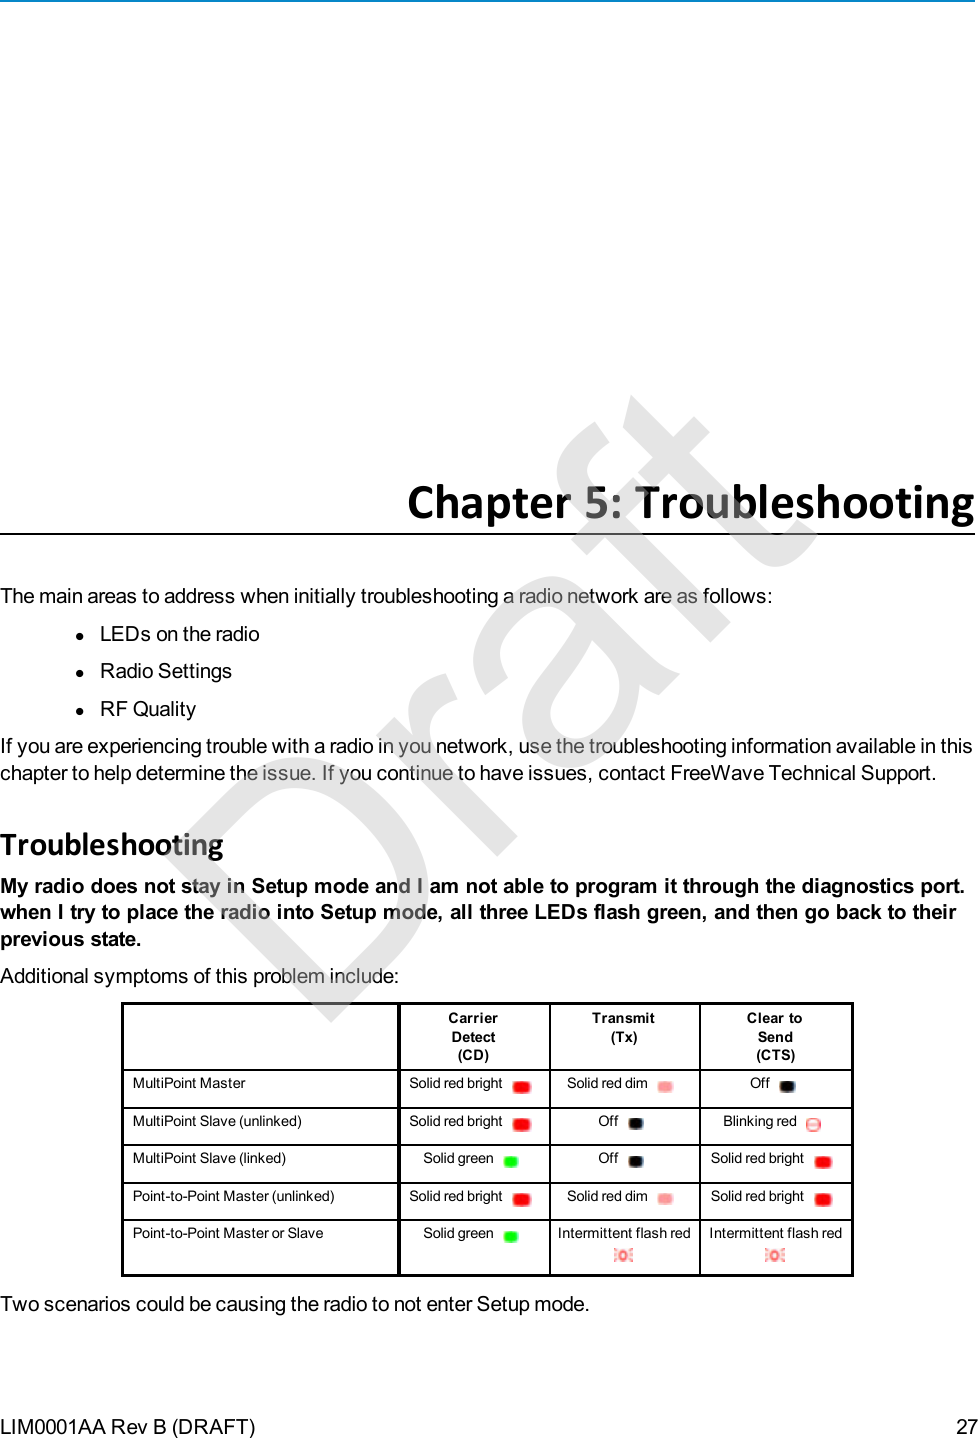 LIM0001AA Rev B (DRAFT)Chapter 5: TroubleshootingThe main areas to address when initially troubleshooting a radio network are as follows:lLEDs on the radiolRadio SettingslRF QualityIf you are experiencing trouble with a radio in you network, use the troubleshooting information available in thischapter to help determine the issue. If you continue to have issues, contact FreeWave Technical Support.TroubleshootingMy radio does not stay in Setup mode and I am not able to program it through the diagnostics port.when I try to place the radio into Setup mode, all three LEDs flash green, and then go back to theirprevious state.Additional symptoms of this problem include:CarrierDetect(CD)Transmit(Tx)Clear toSend(CTS)MultiPoint Master Solid red bright Solid red dim OffMultiPoint Slave (unlinked) Solid red bright Off Blinking redMultiPoint Slave (linked) Solid green Off Solid red brightPoint-to-Point Master (unlinked) Solid red bright Solid red dim Solid red brightPoint-to-Point Master or Slave Solid green Intermittent flash red Intermittent flash redTwo scenarios could be causing the radio to not enter Setup mode.27Draft